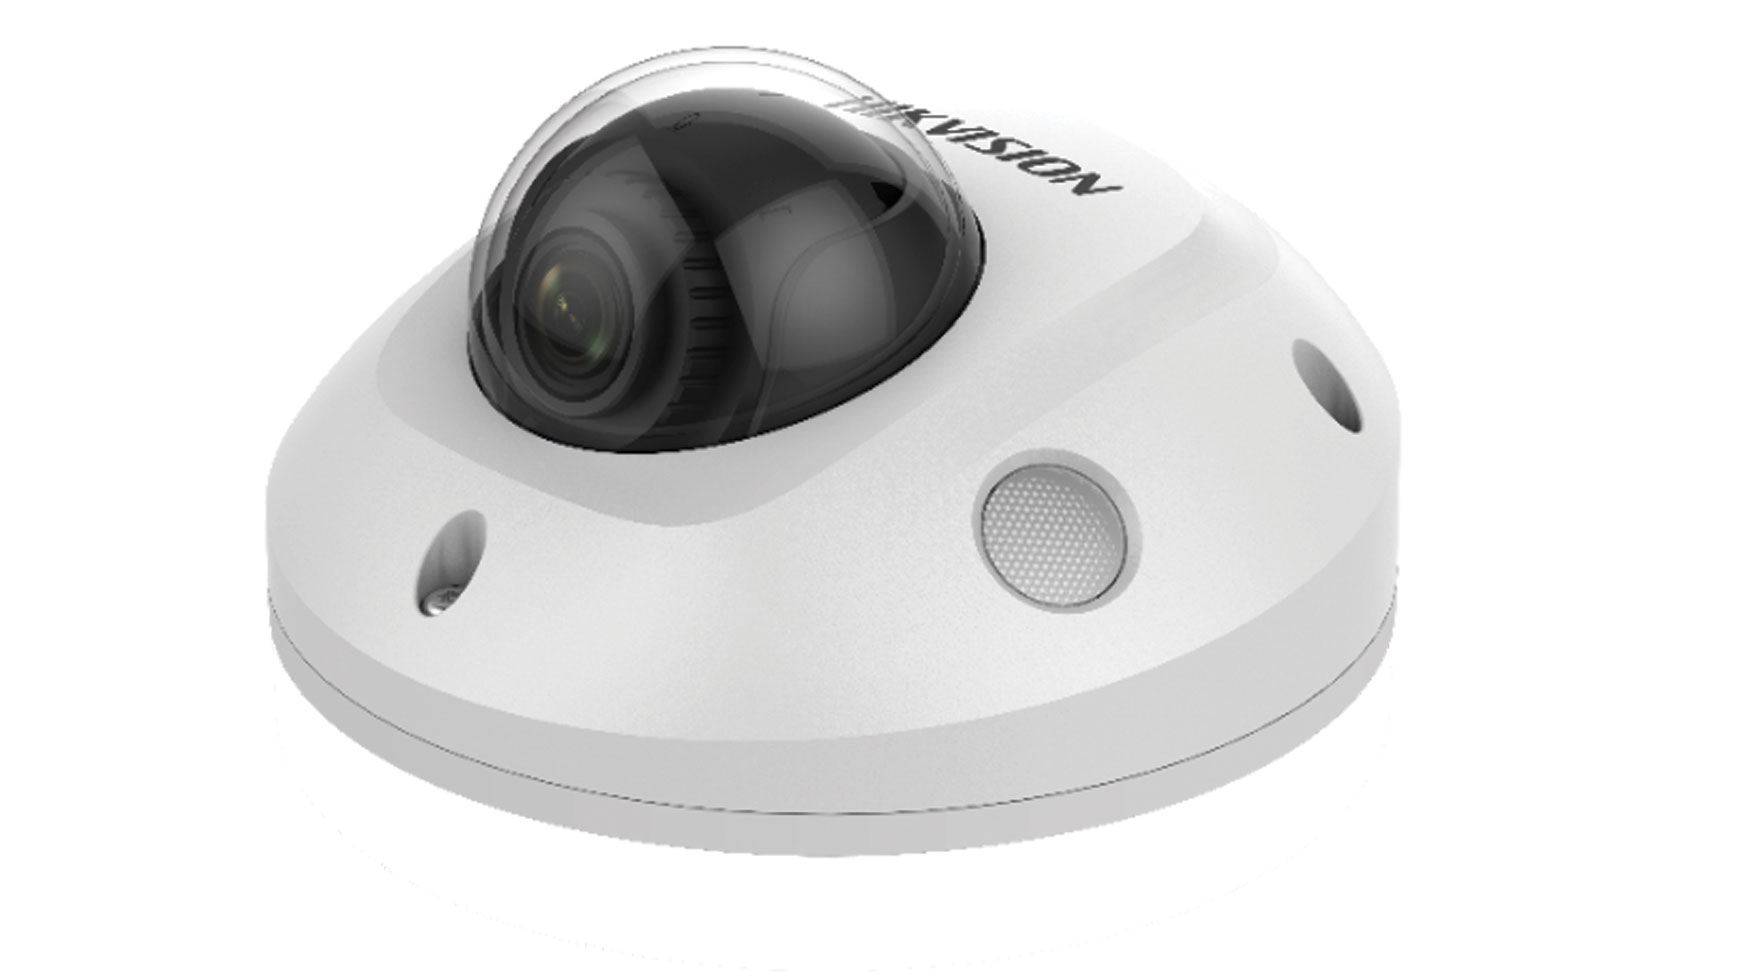 Hikvision DS-2CD2523G0-IWS(2.8mm)